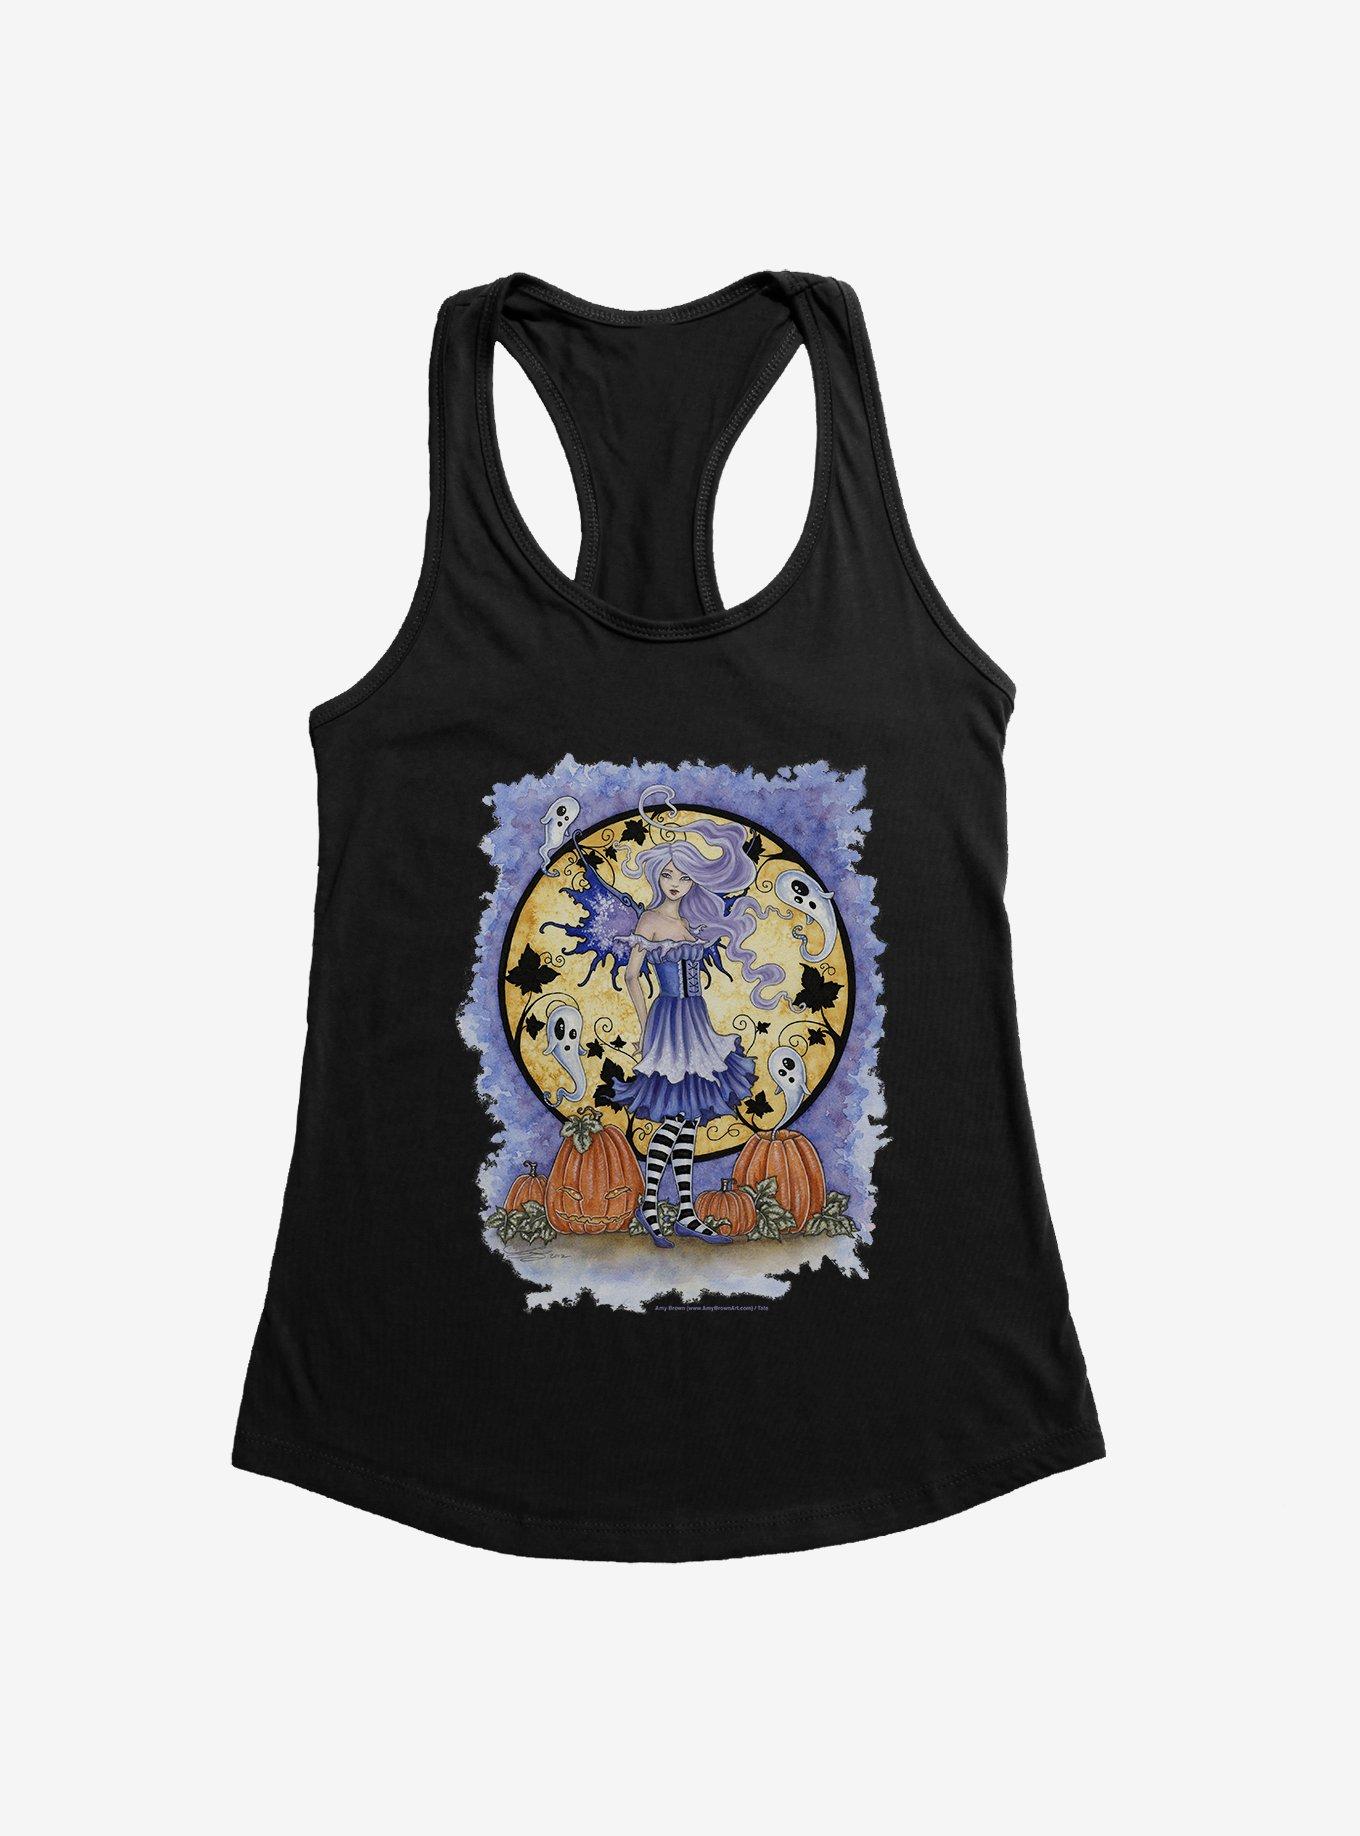 Haunted Pumpkin Patch Girls Tank by Amy Brown